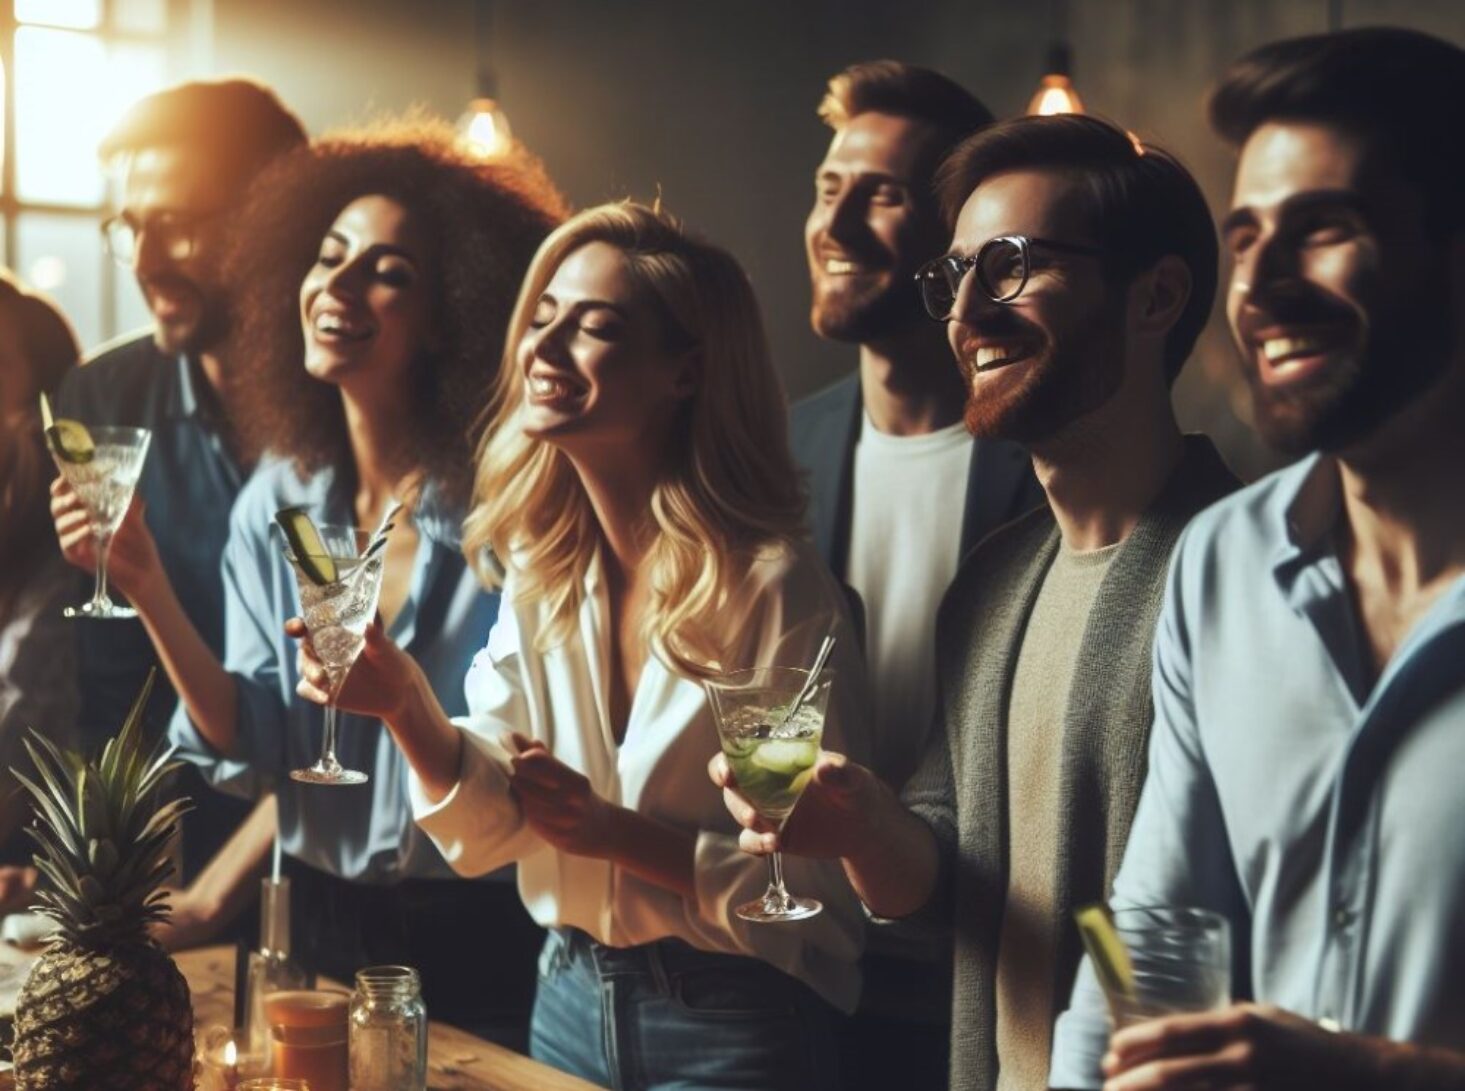 How to Plan an Office Party That Reflects Your Company Culture